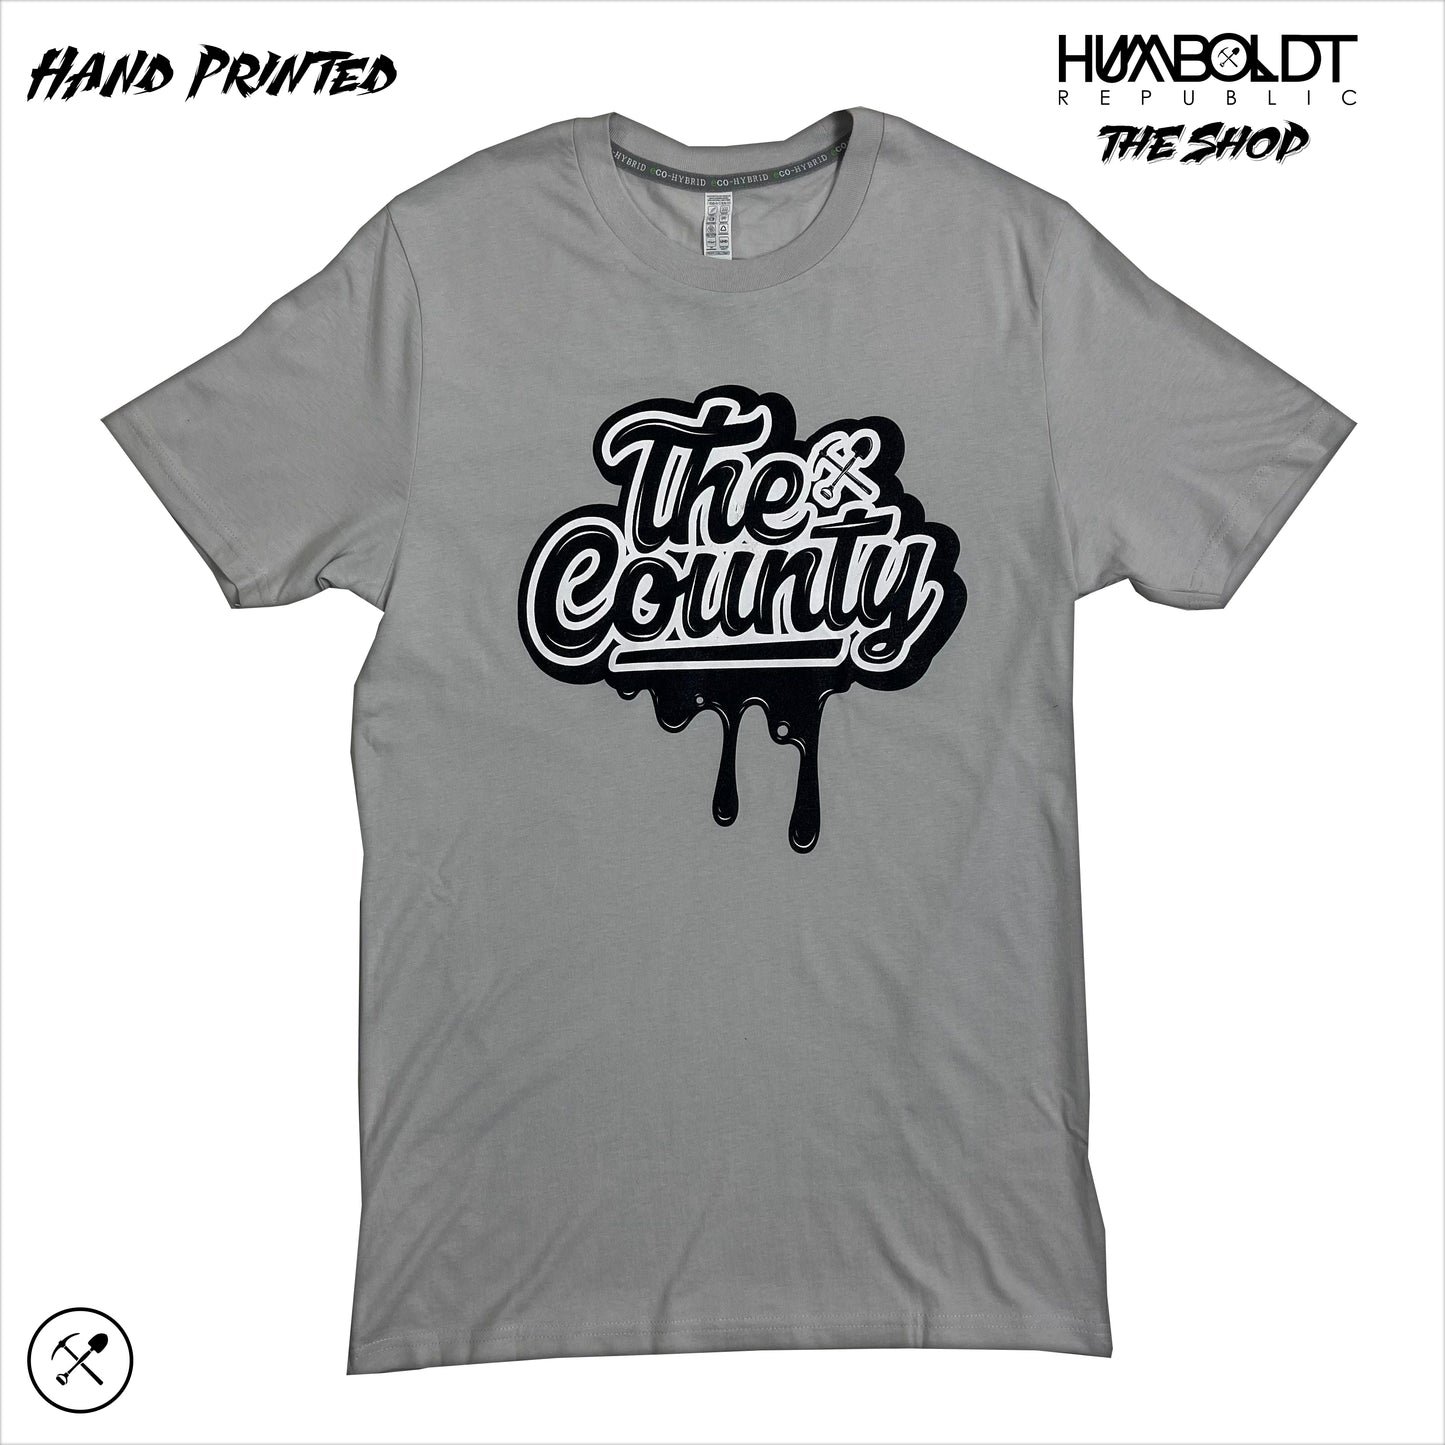 "The County" Men's Eco T-Shirt